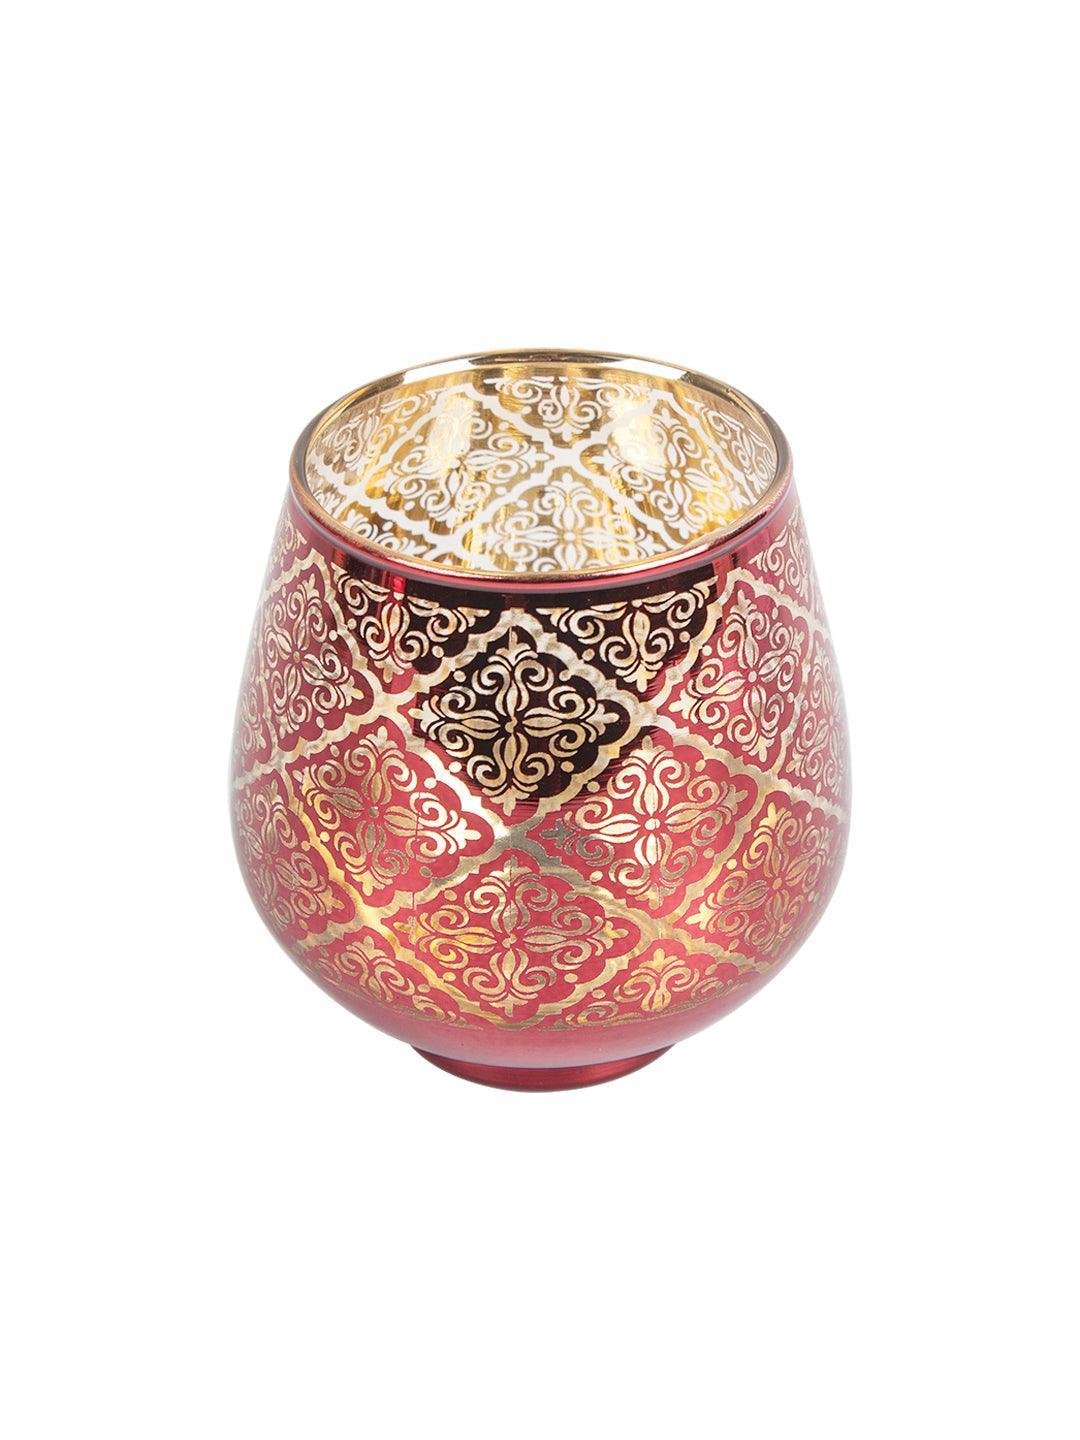 Diwali Decorating Tealight Candle Holders Pack Of 2 Pcs - MARKET 99